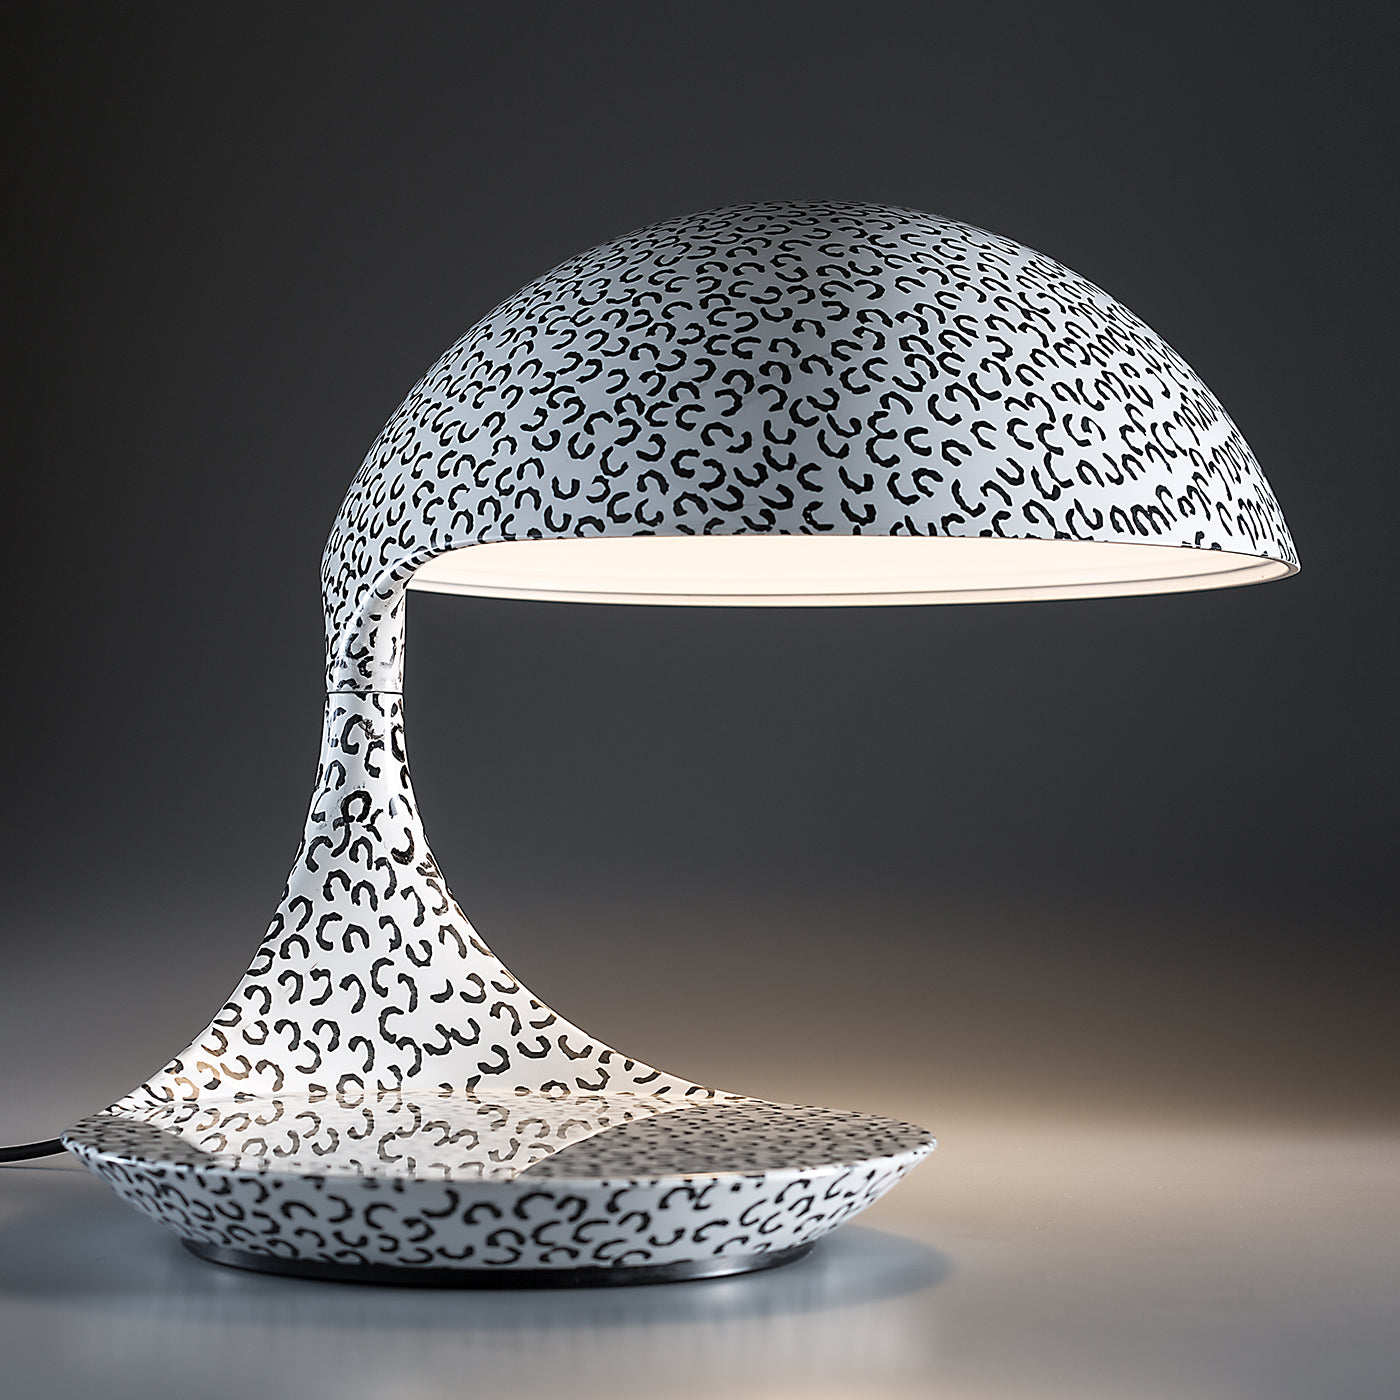 Cobra Texture Black-And-White Table Lamp by Paola Navone - Alternative view 2